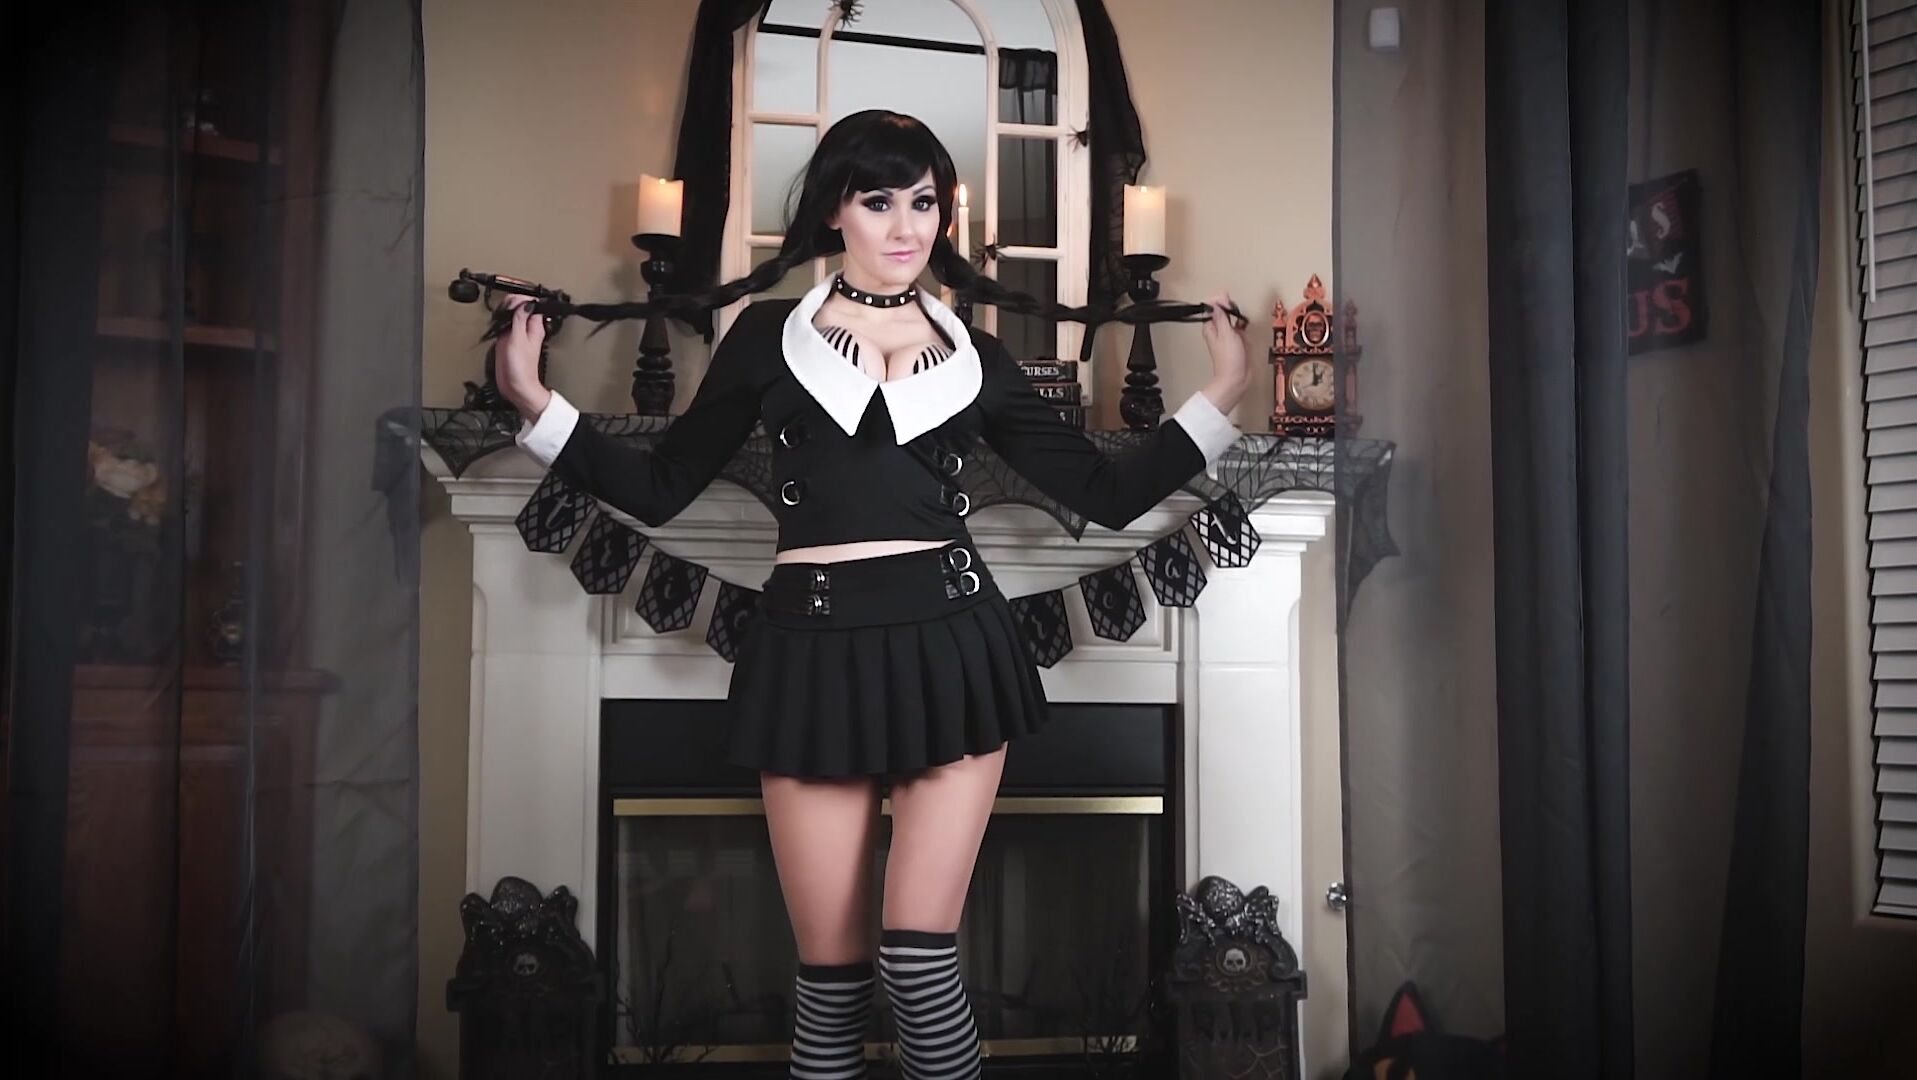 Angie Griffin - Wednesday Addams